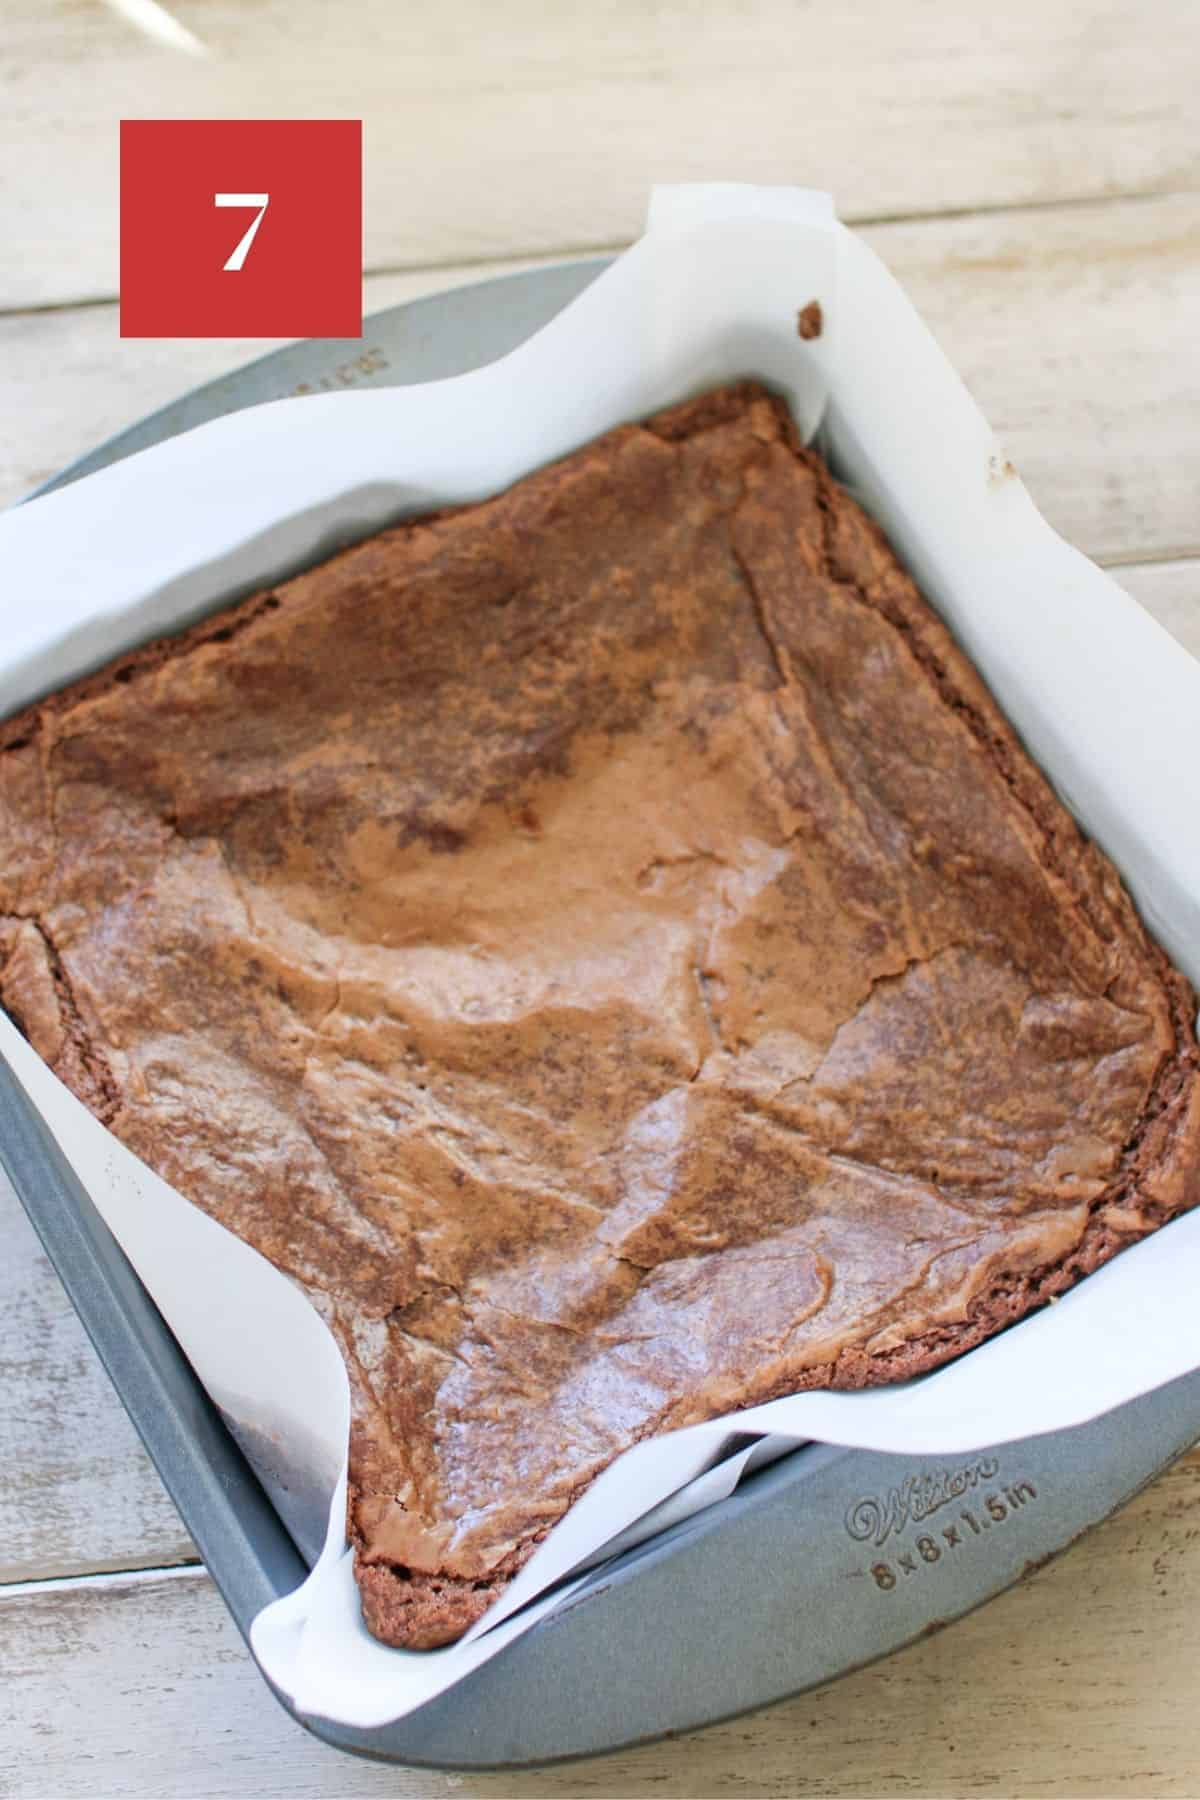 High Altitude brownies baked in a 8x8 baking pan lined with white parchment paper. The pan sits on a wood plank background.  In the upper left corner is a dark red square with a white '7' in the center.